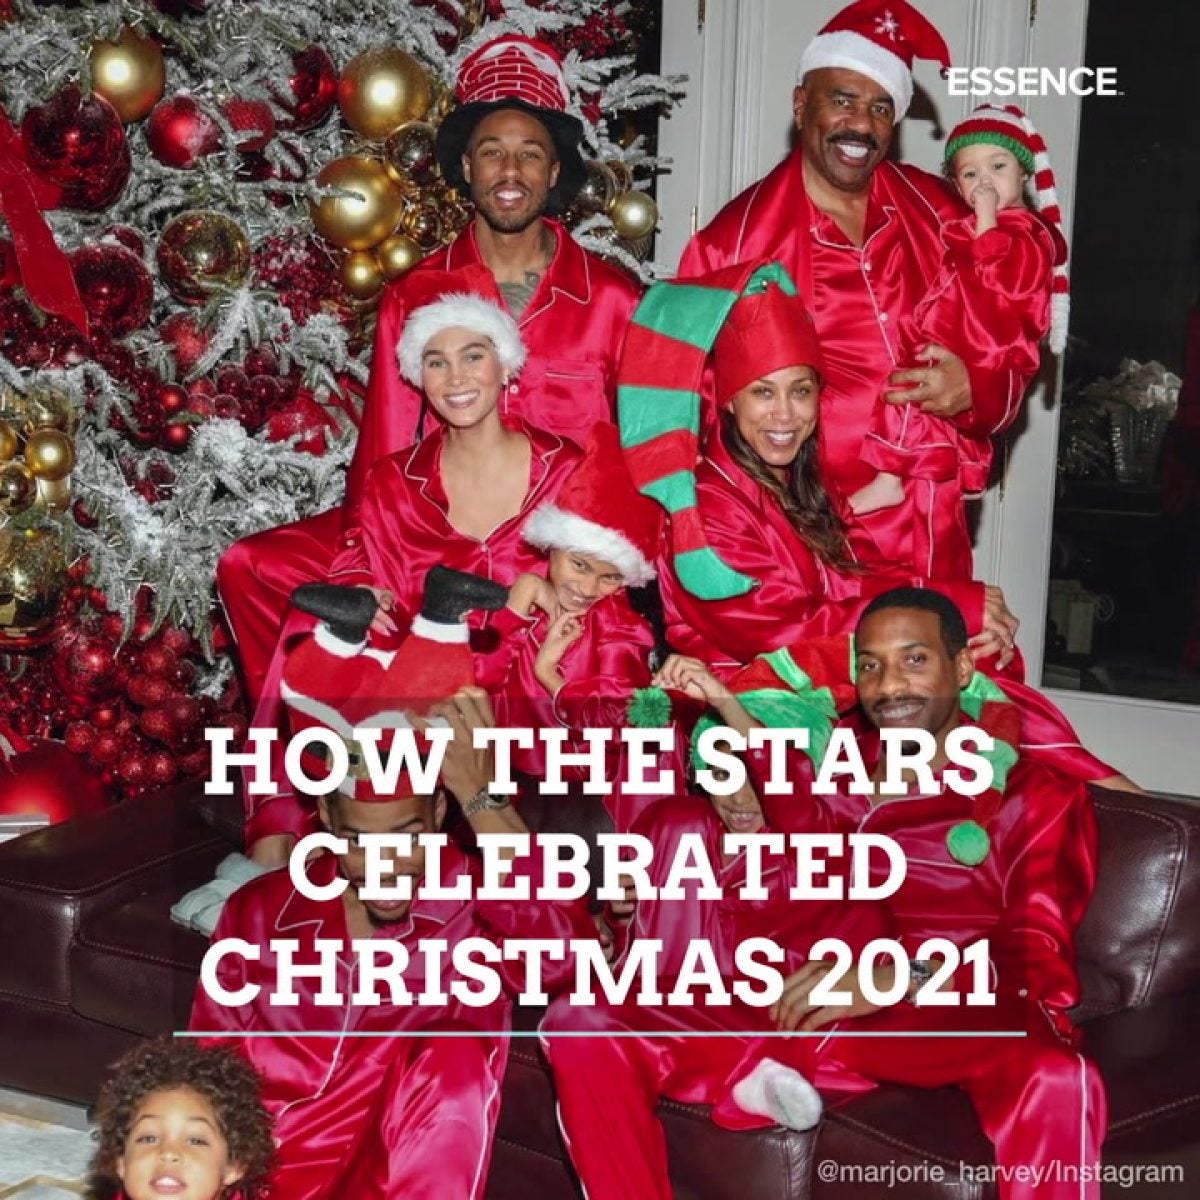 In My Feed | How The Stars Celebrated Christmas 2021